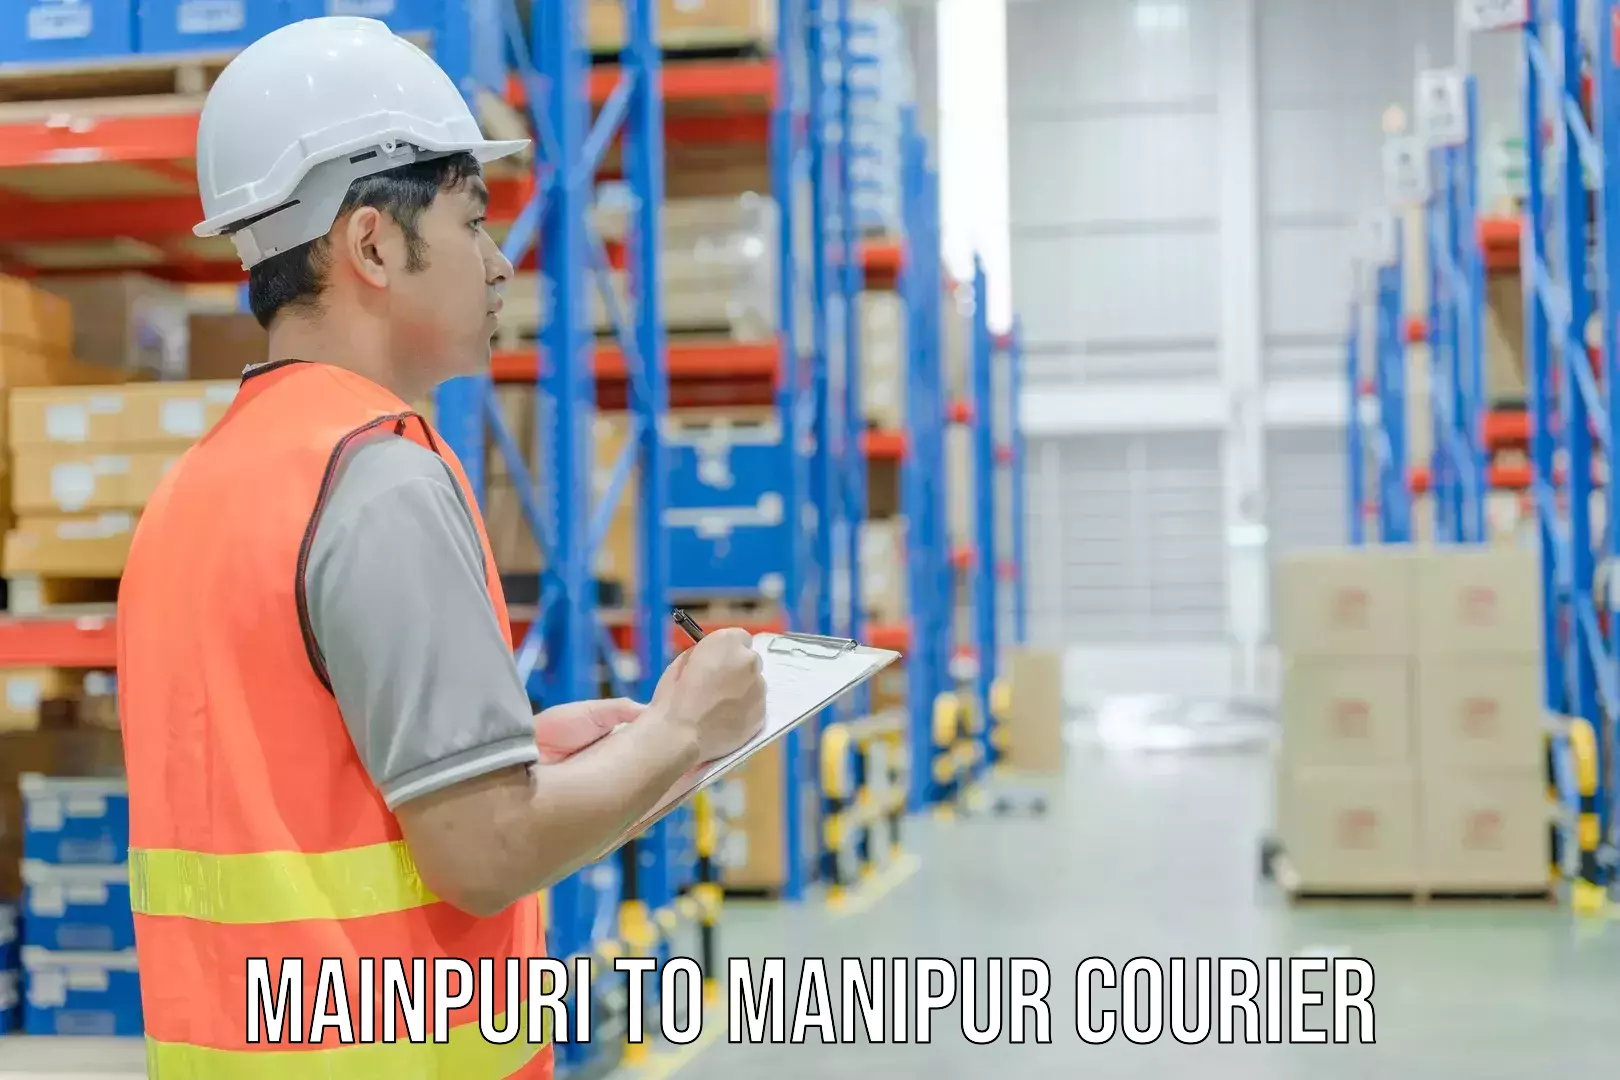 Global courier networks Mainpuri to Manipur